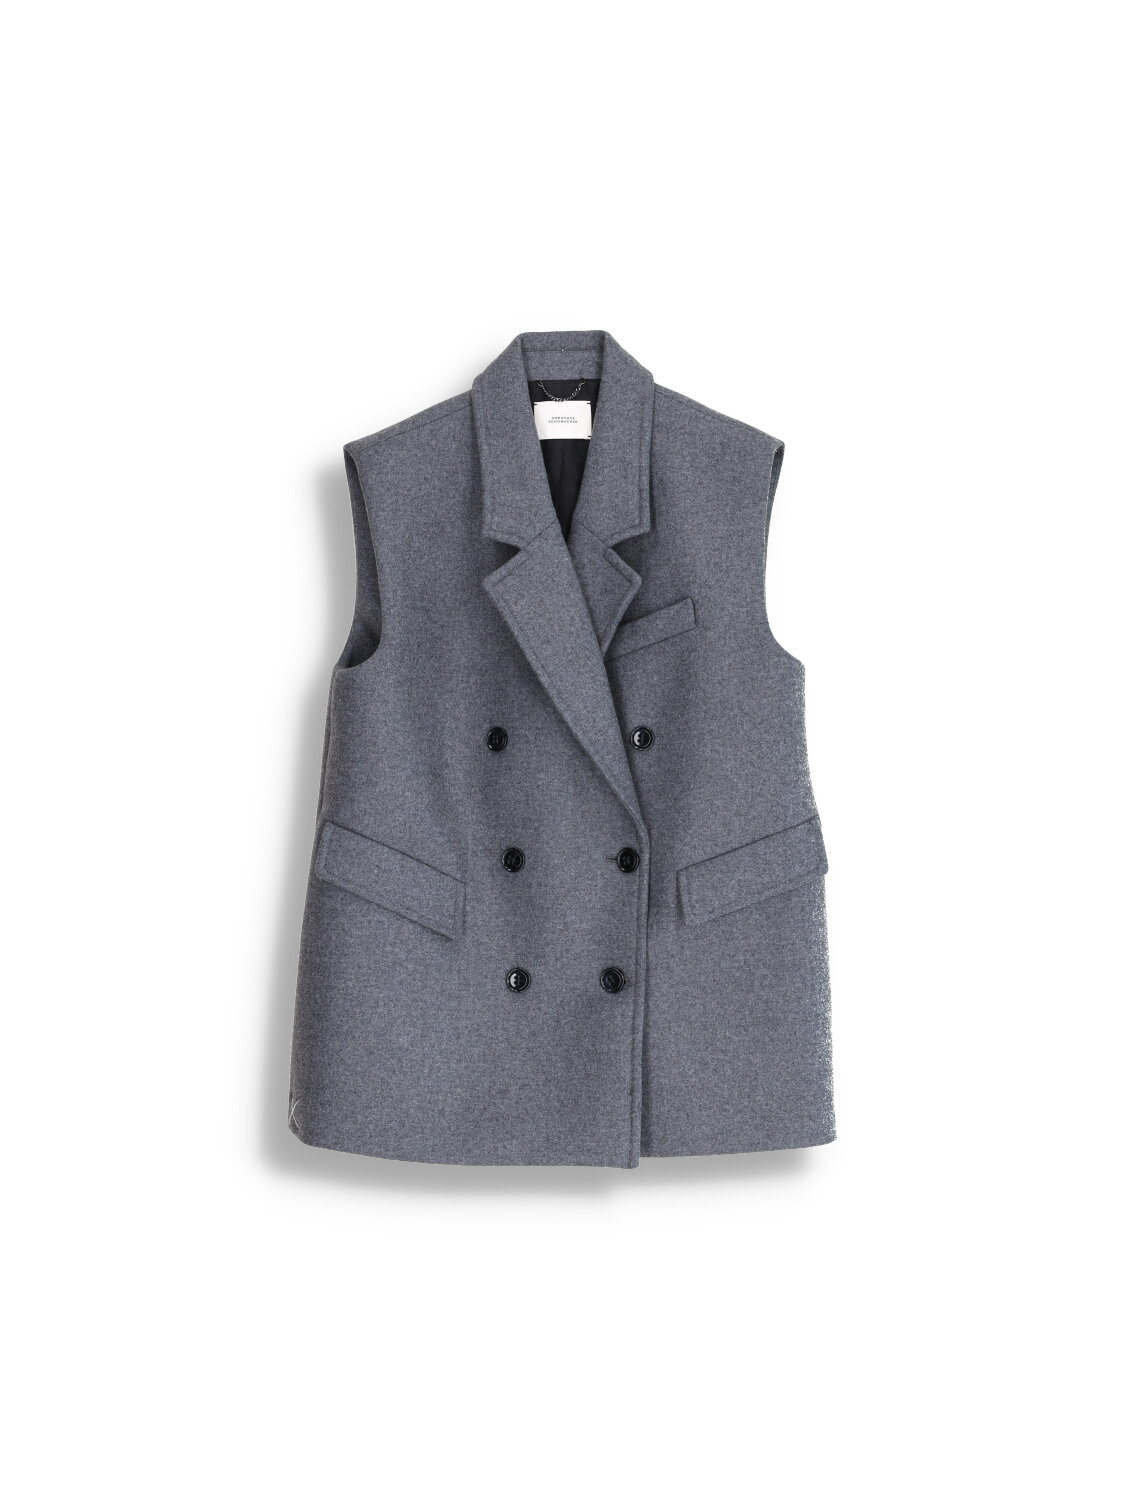 Oversized vest made of wool